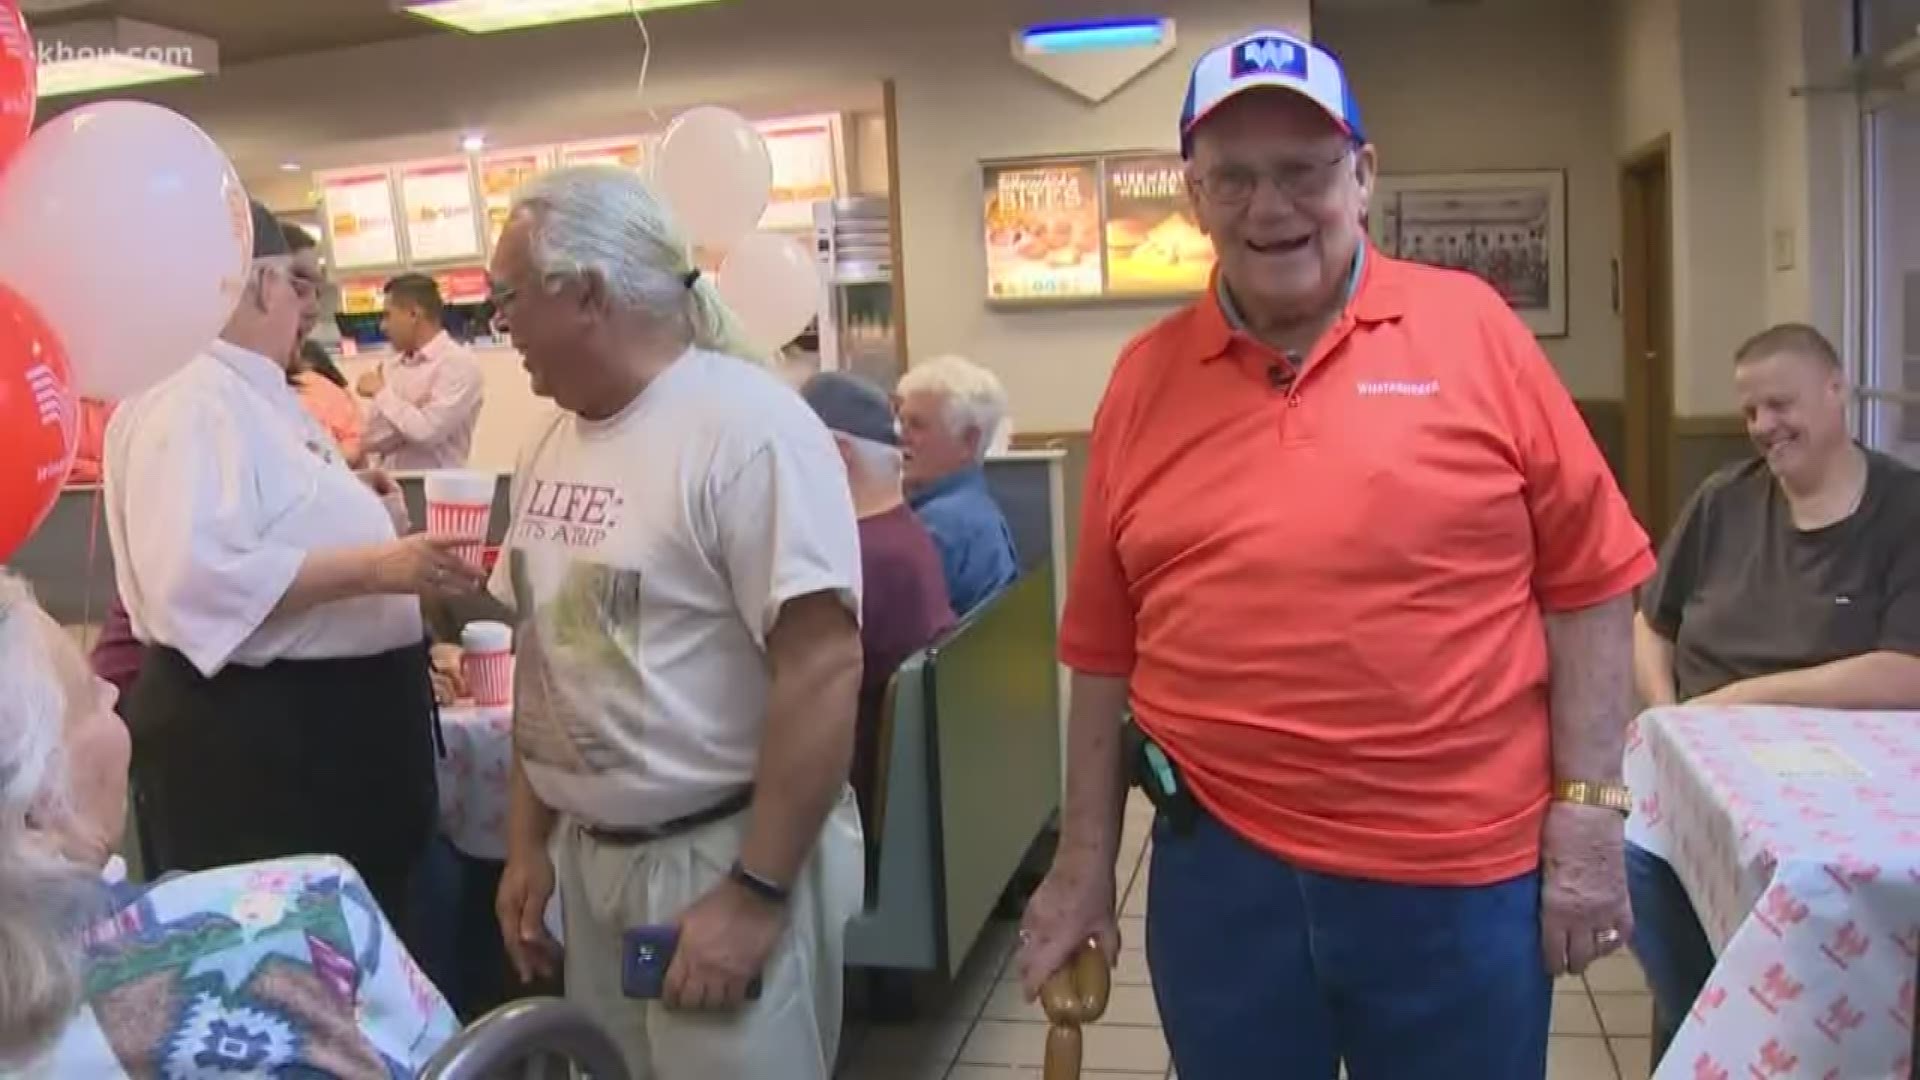 Whataburger helped pull off a fantastic surprise party for one of their favorite customers who turned 90 recently.